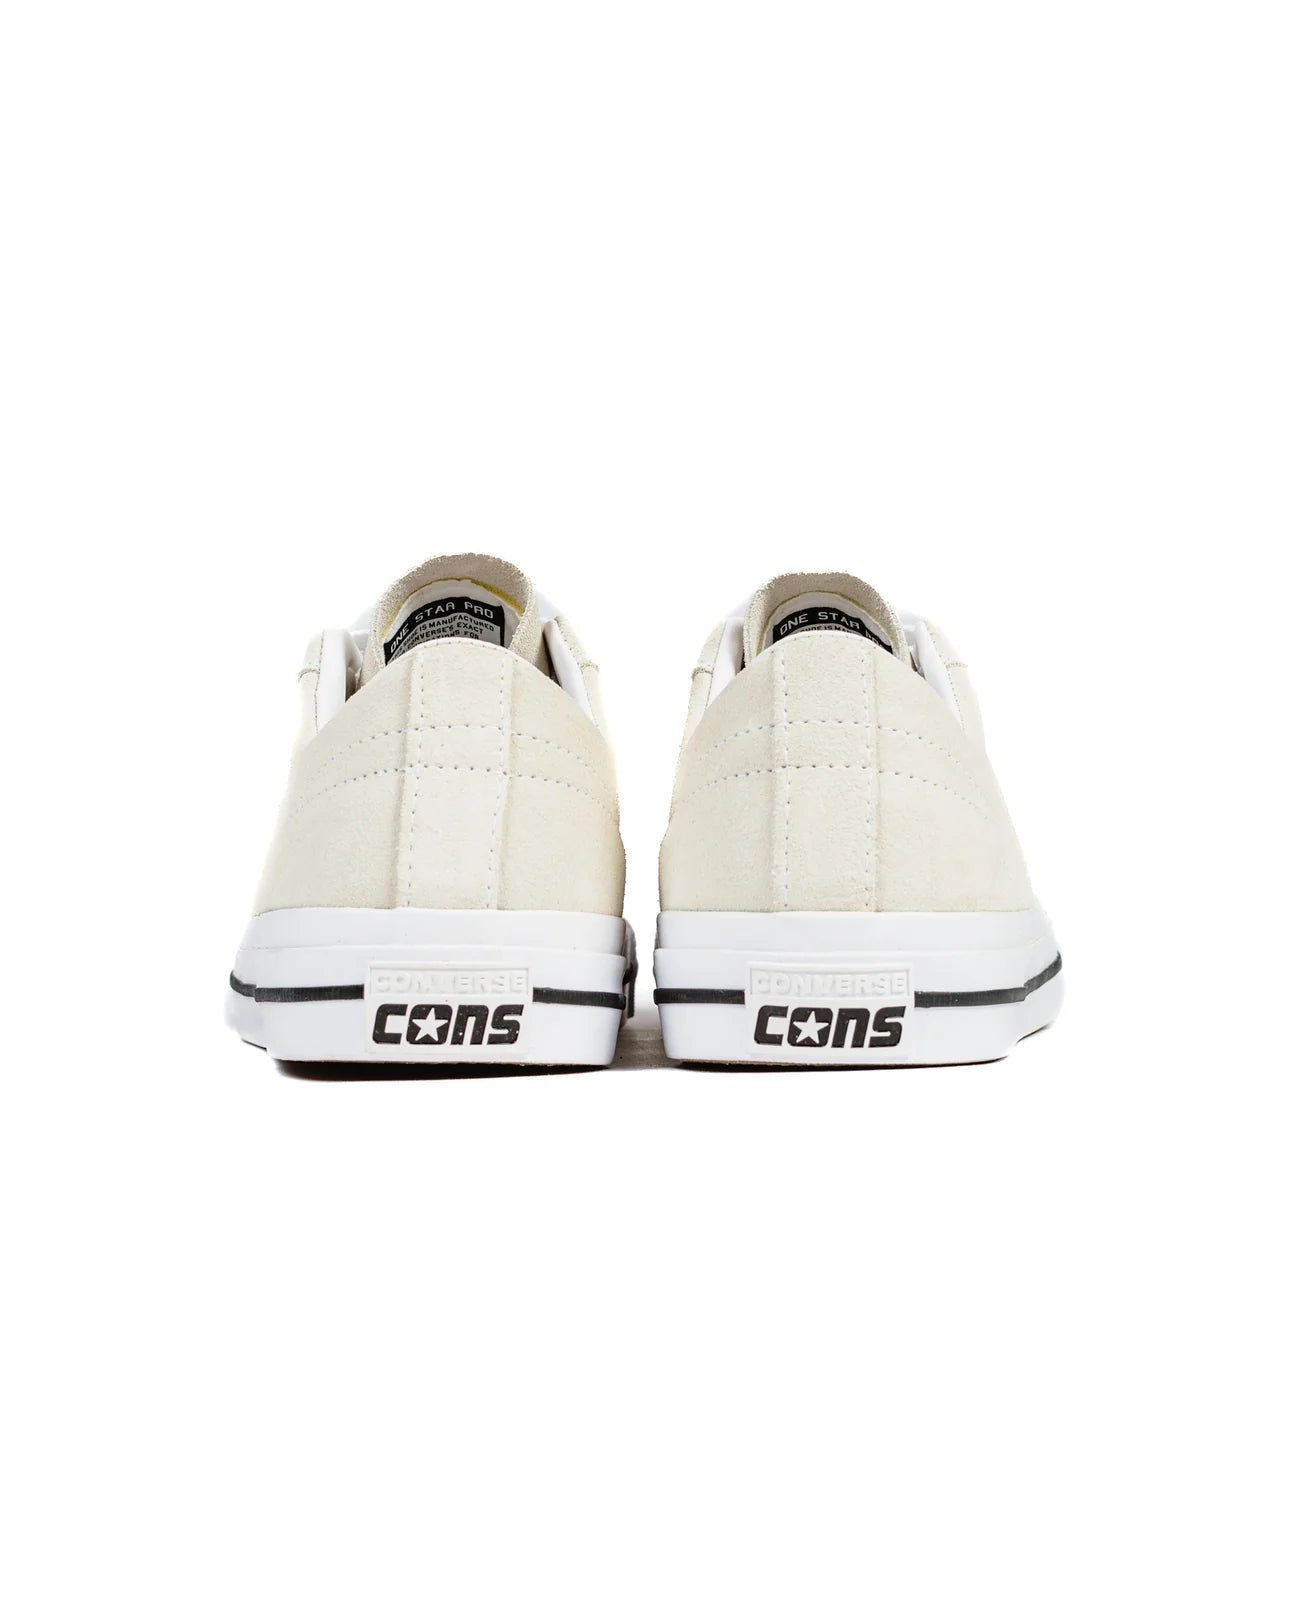 CONS/コンズ One Star Pro Ox 172950C